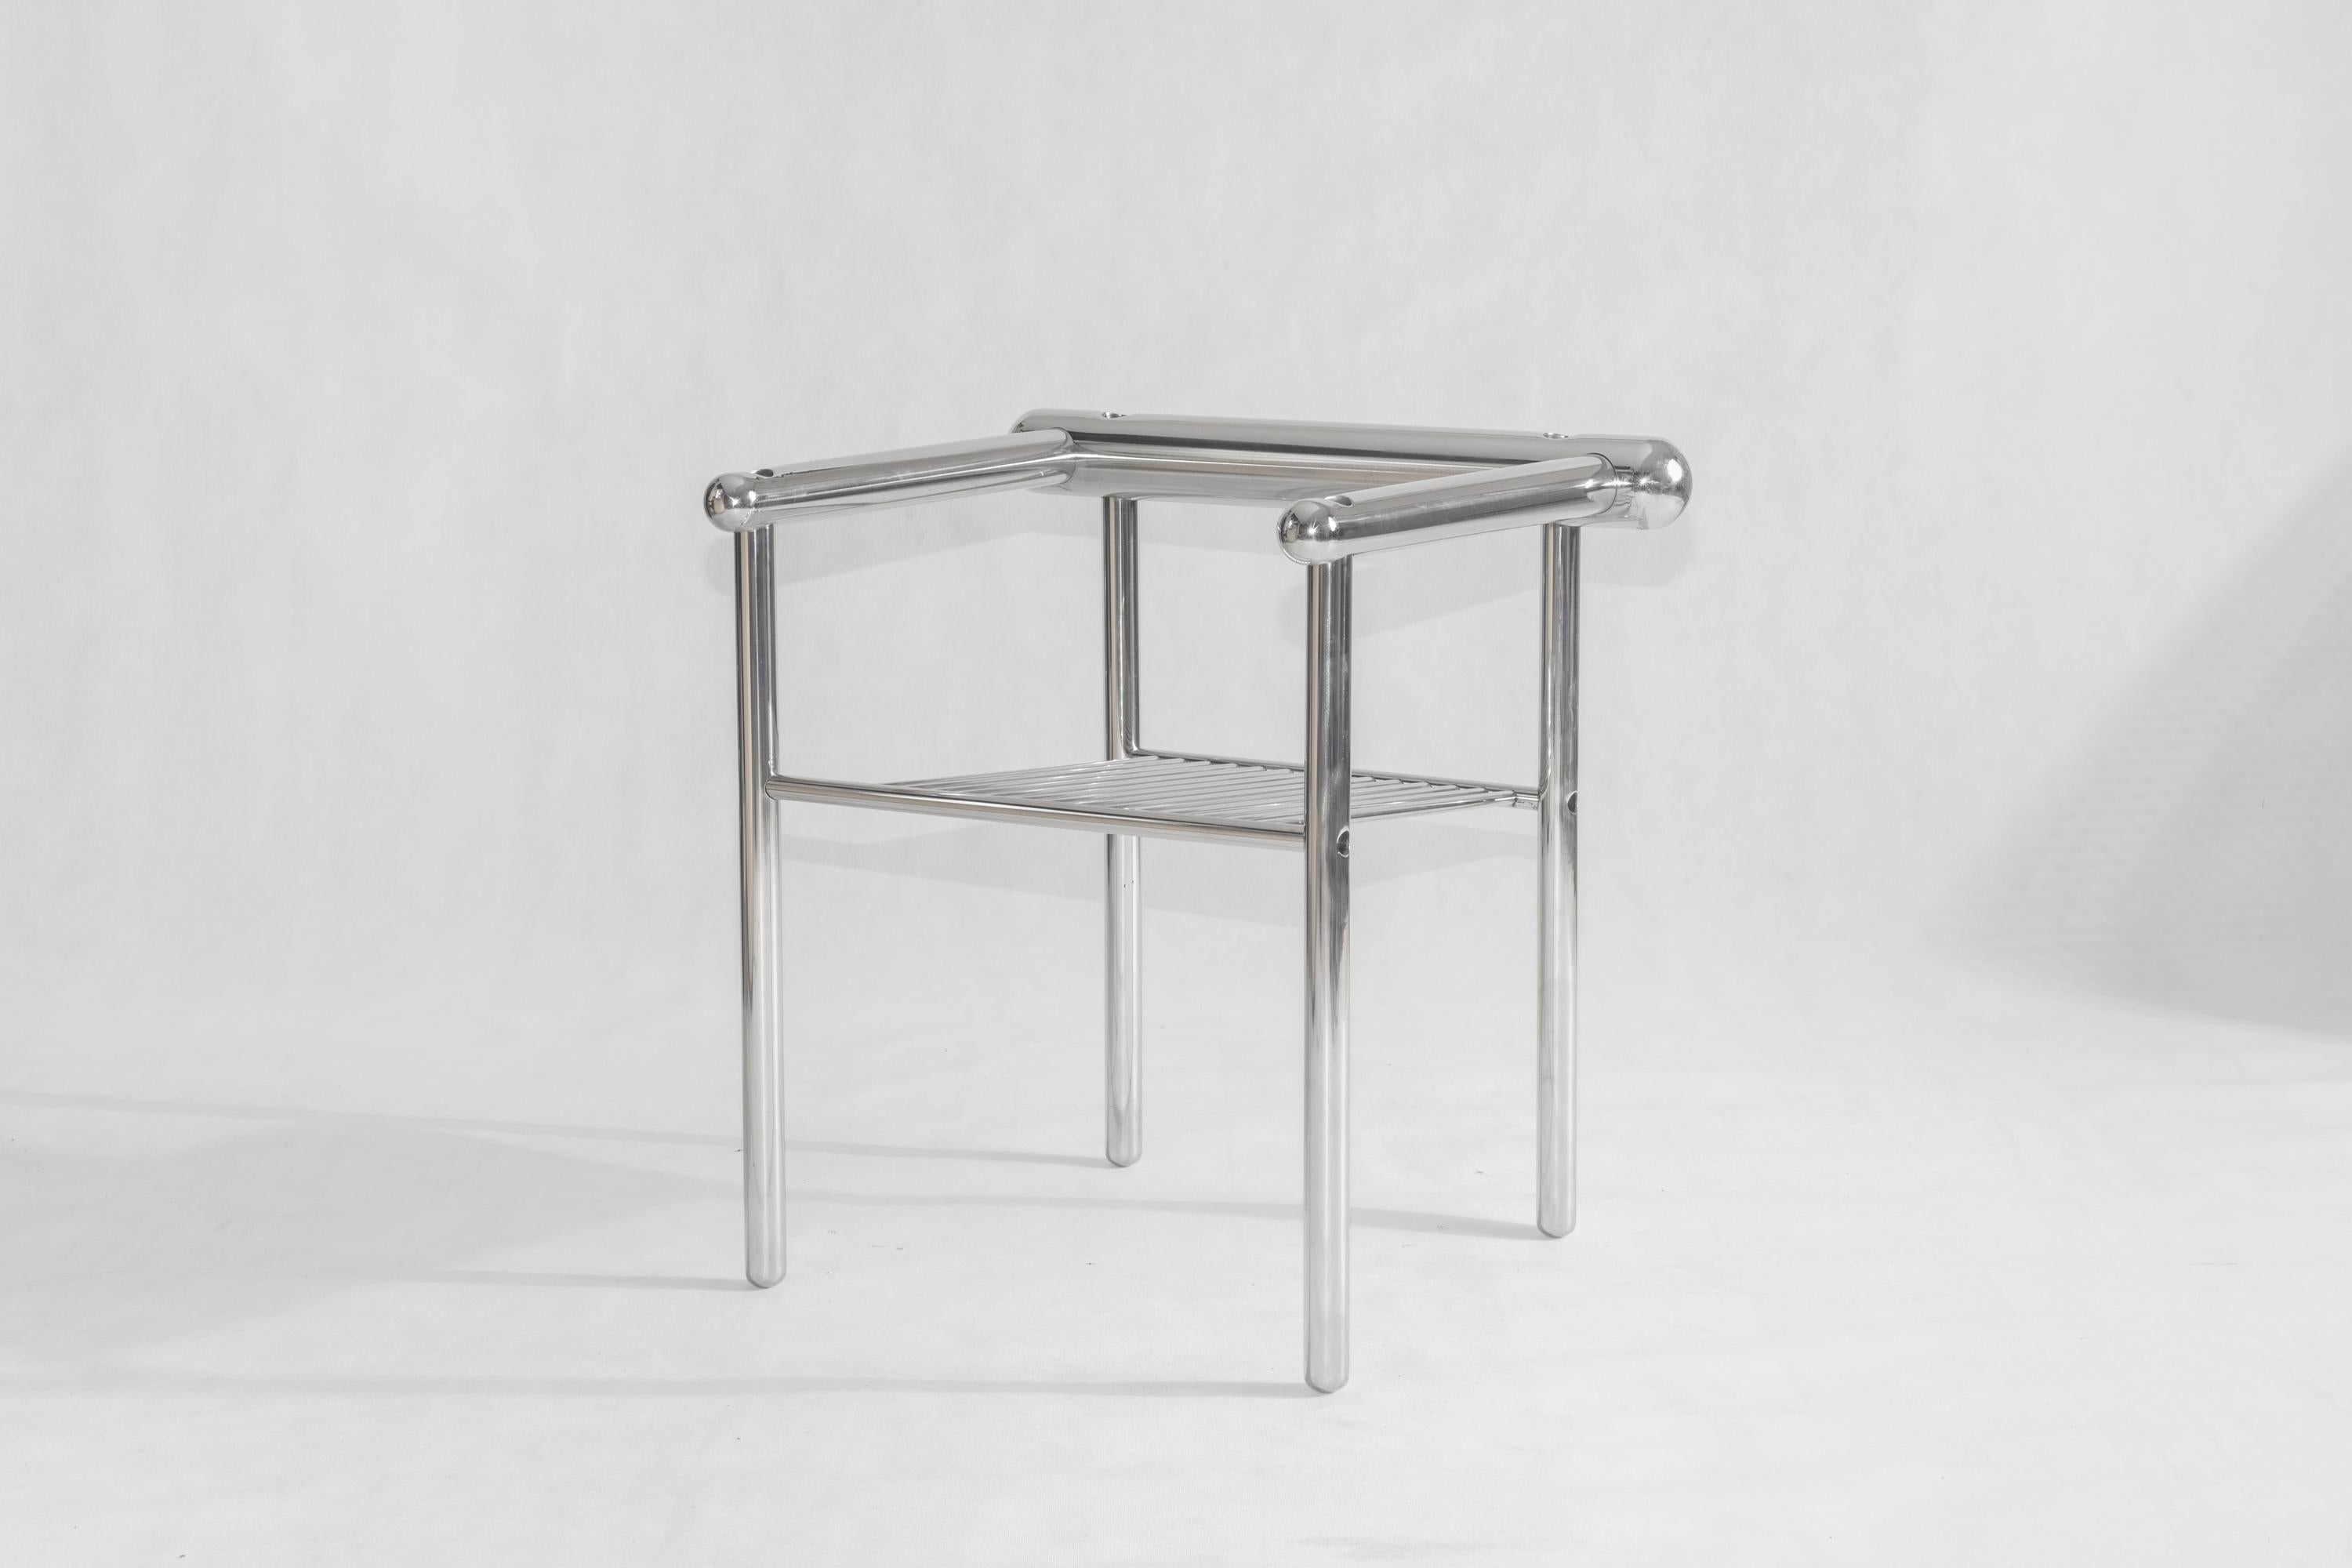 Spektra Chair by  Mati Sipiora
Dimensions: D 54 x W 68 x H 68 cm
Materials: Polished Stainless Steel. 
Finish: Polished stainless steel.
Weight: 10KG (Steel) 9KG (Stainless)
Max Capacity: 120 KG

Spektra is a steel object that functions as an